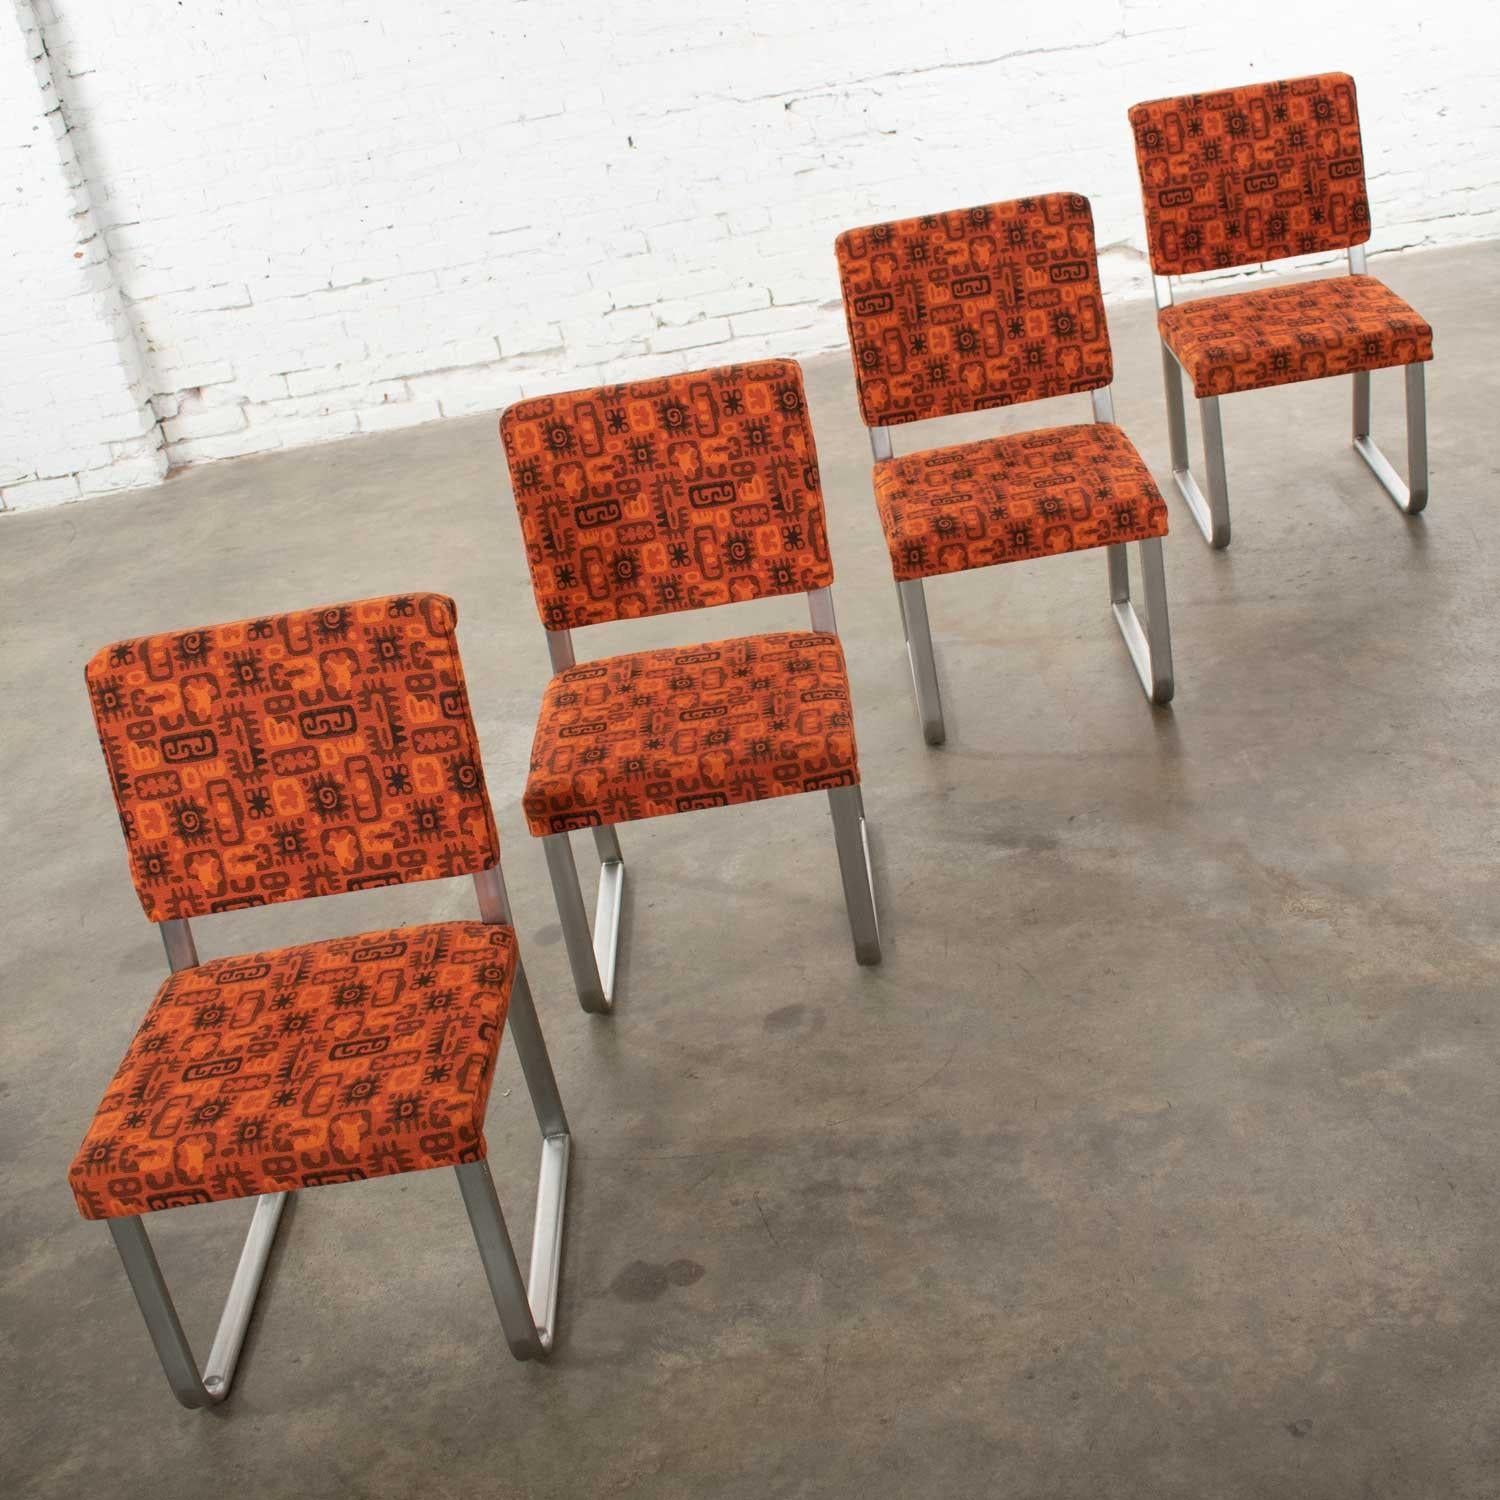 4 Streamline Modern Railroad Dining Car Chairs Stainless Steel and Orange Fabric For Sale 1